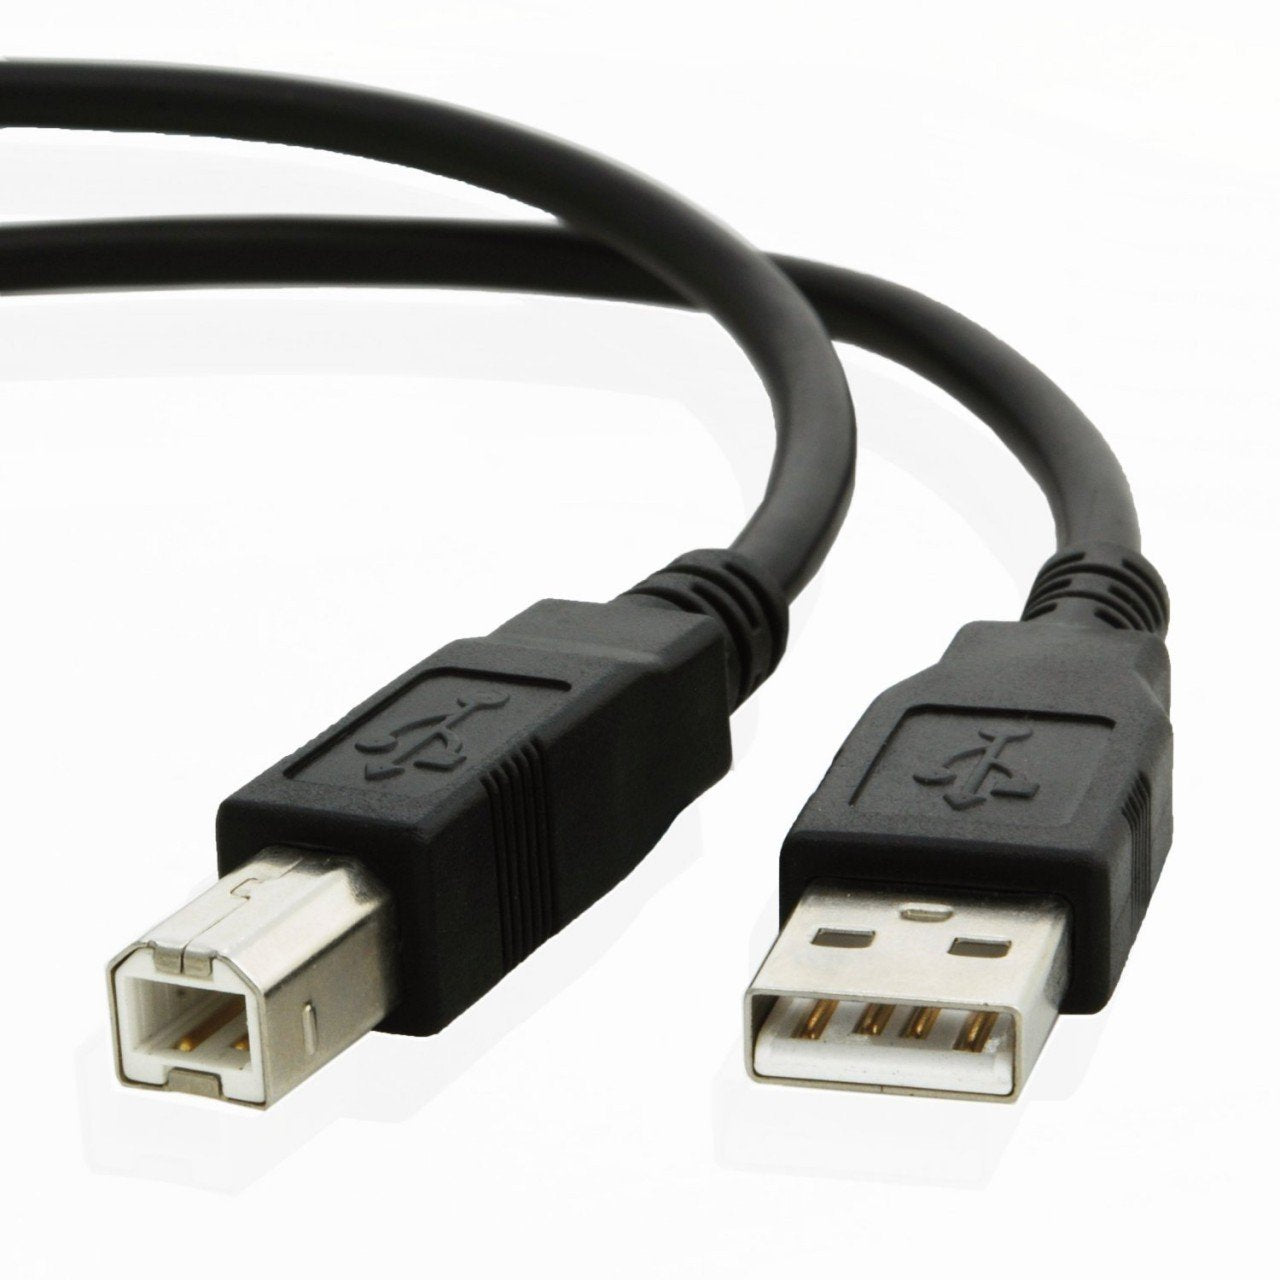 USB cable for Epson BRIGHTLINK PRO 1430WI